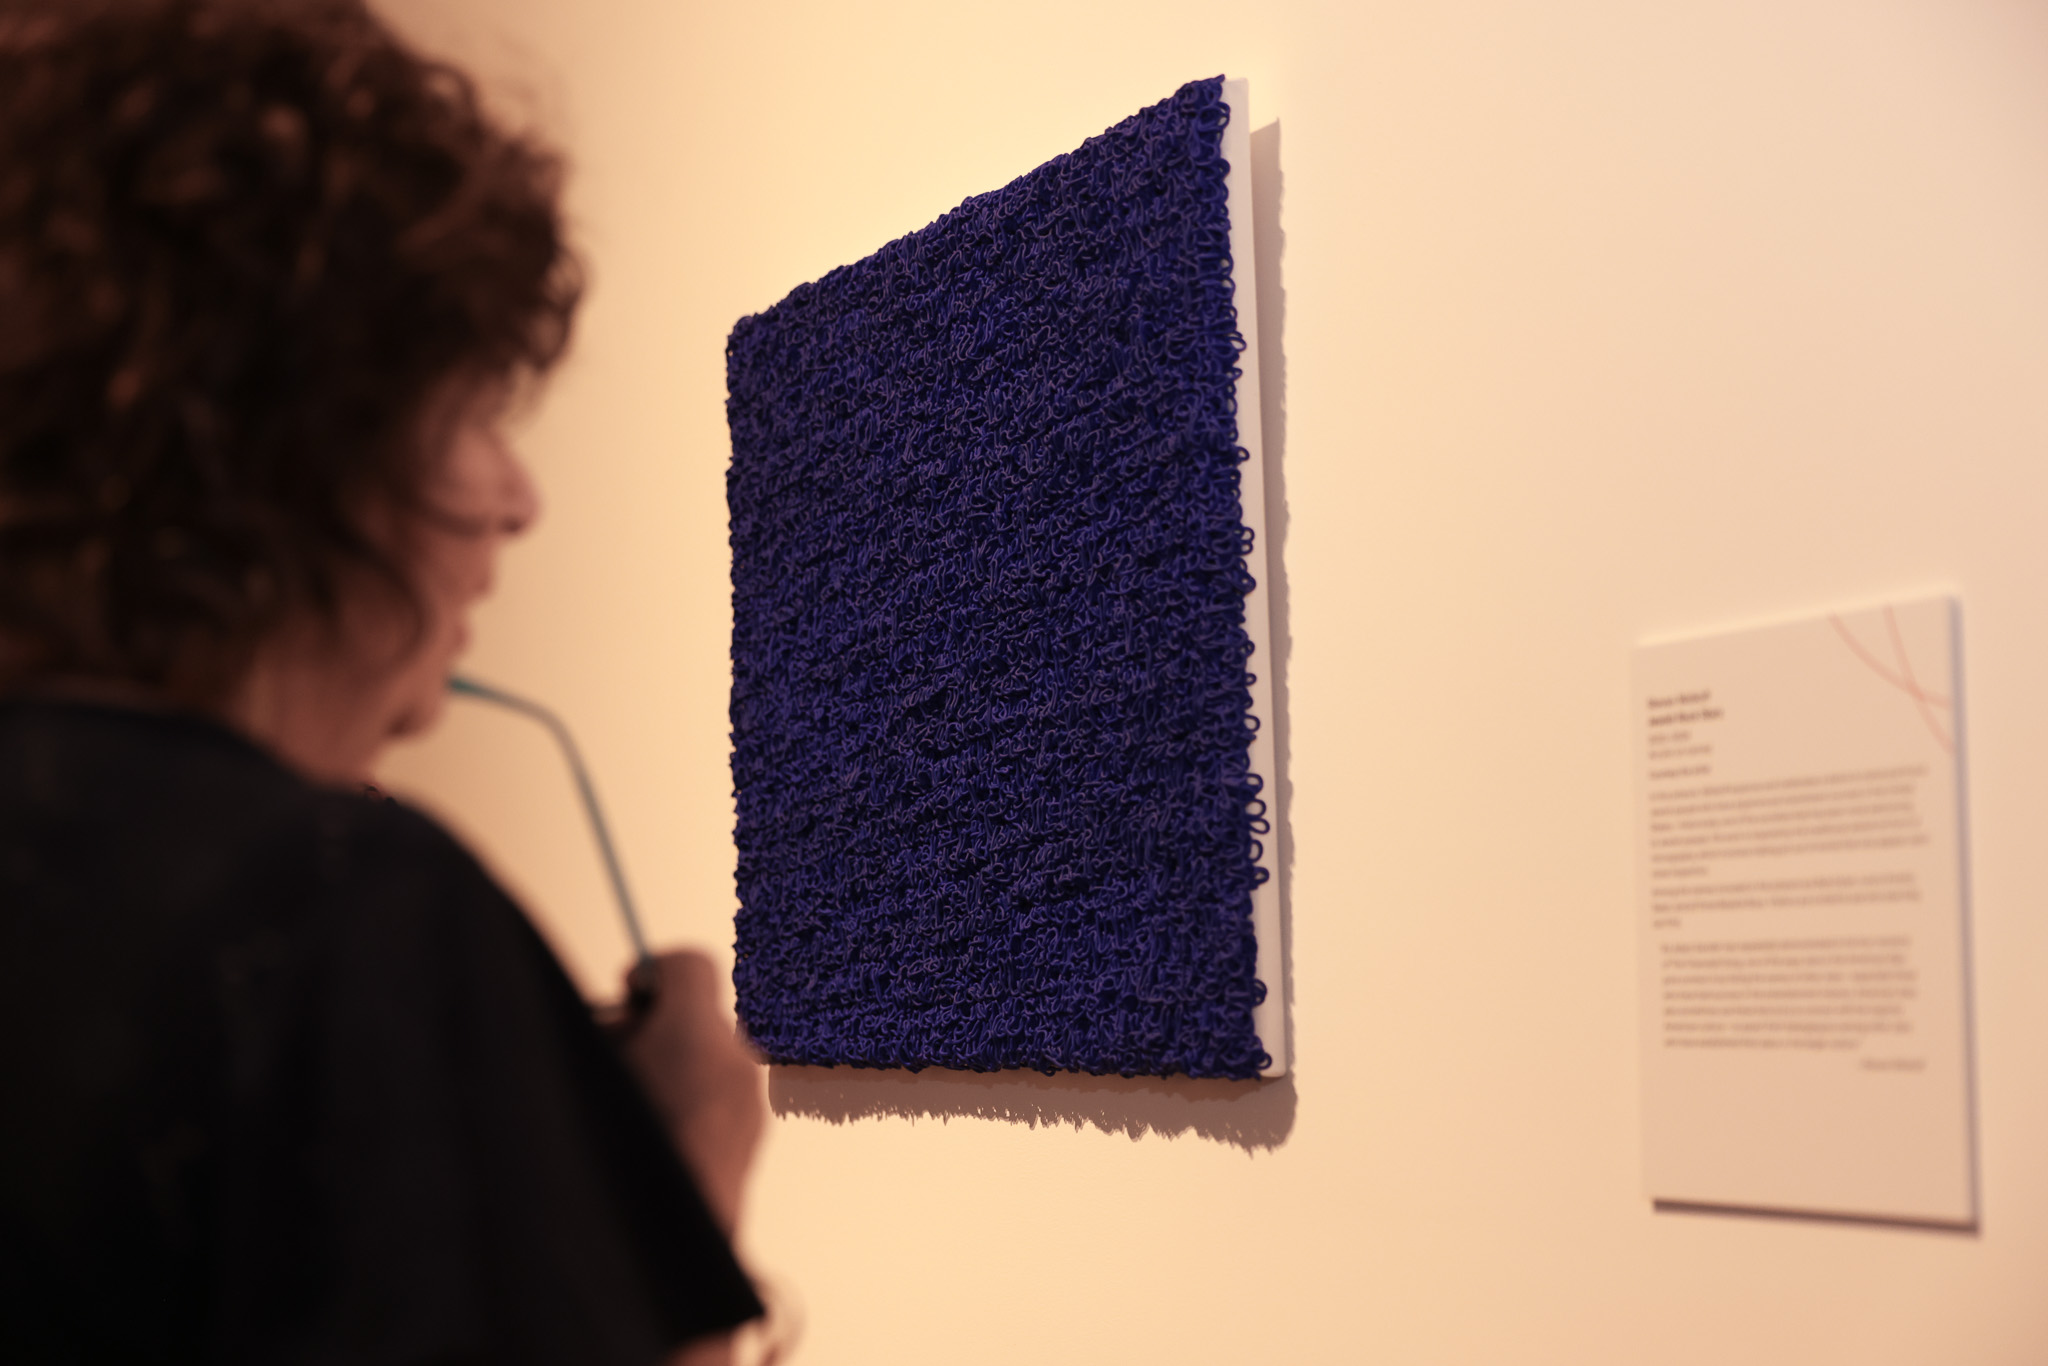 A person is observing a textured, deep blue rectangular artwork mounted on a white wall. A description plaque is also mounted on the wall next to the artwork.